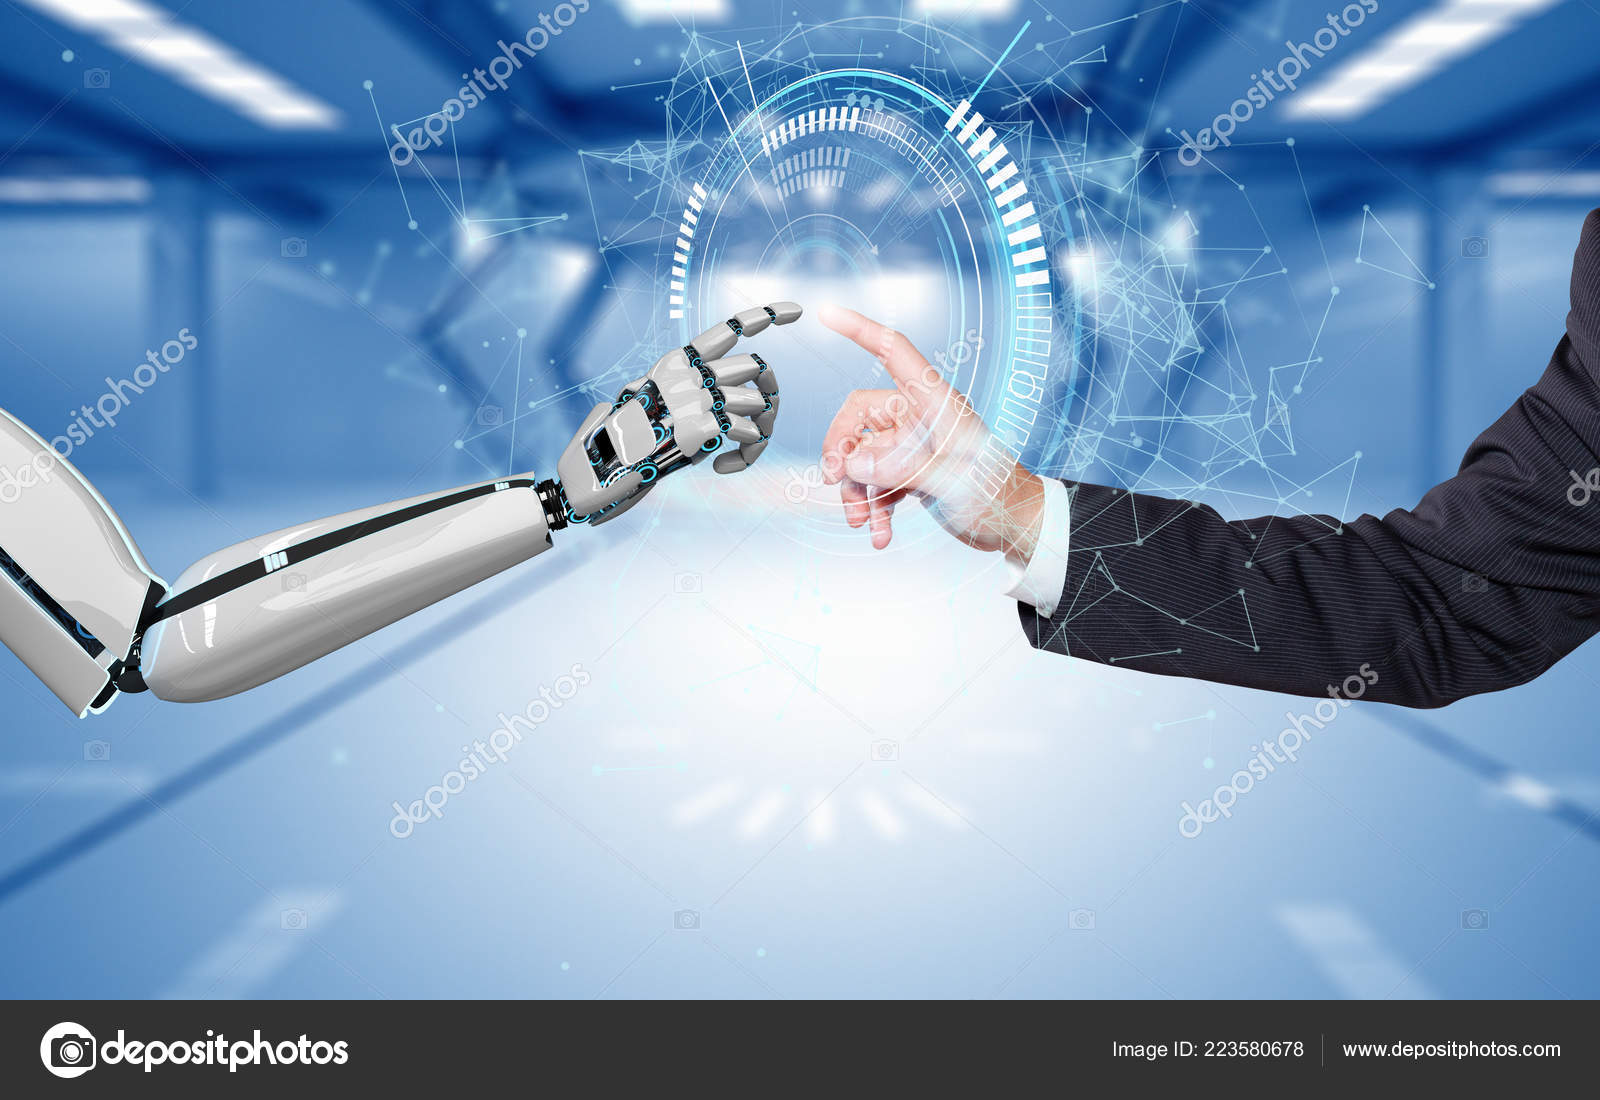 Free Pictures Of Robotic Hands Touching